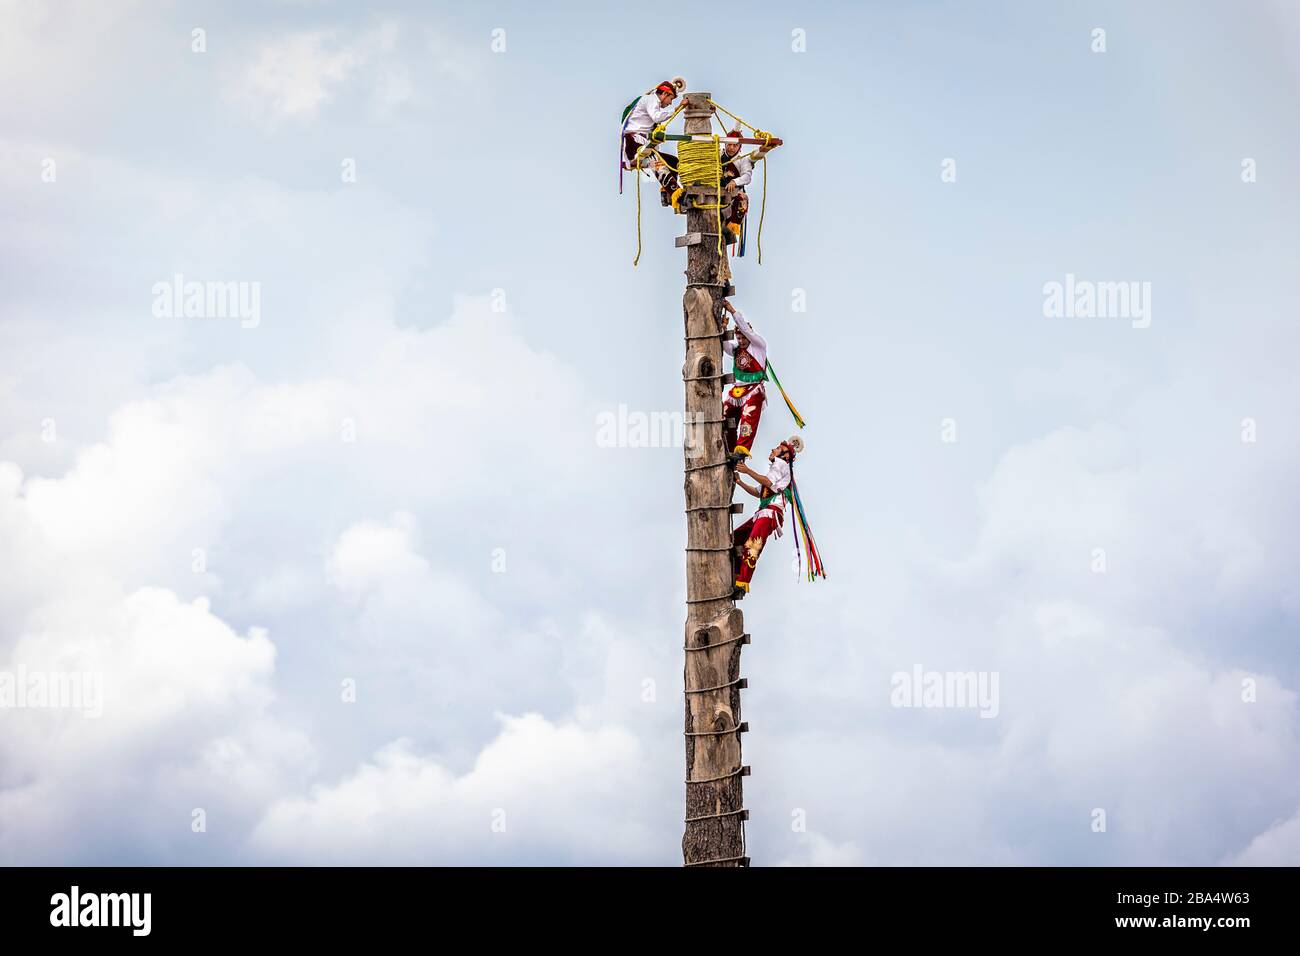 Voladores or fliers climb up into the clouds before descending around the post to the ground in Cuetzalan, Puebla, Mexico. Stock Photo